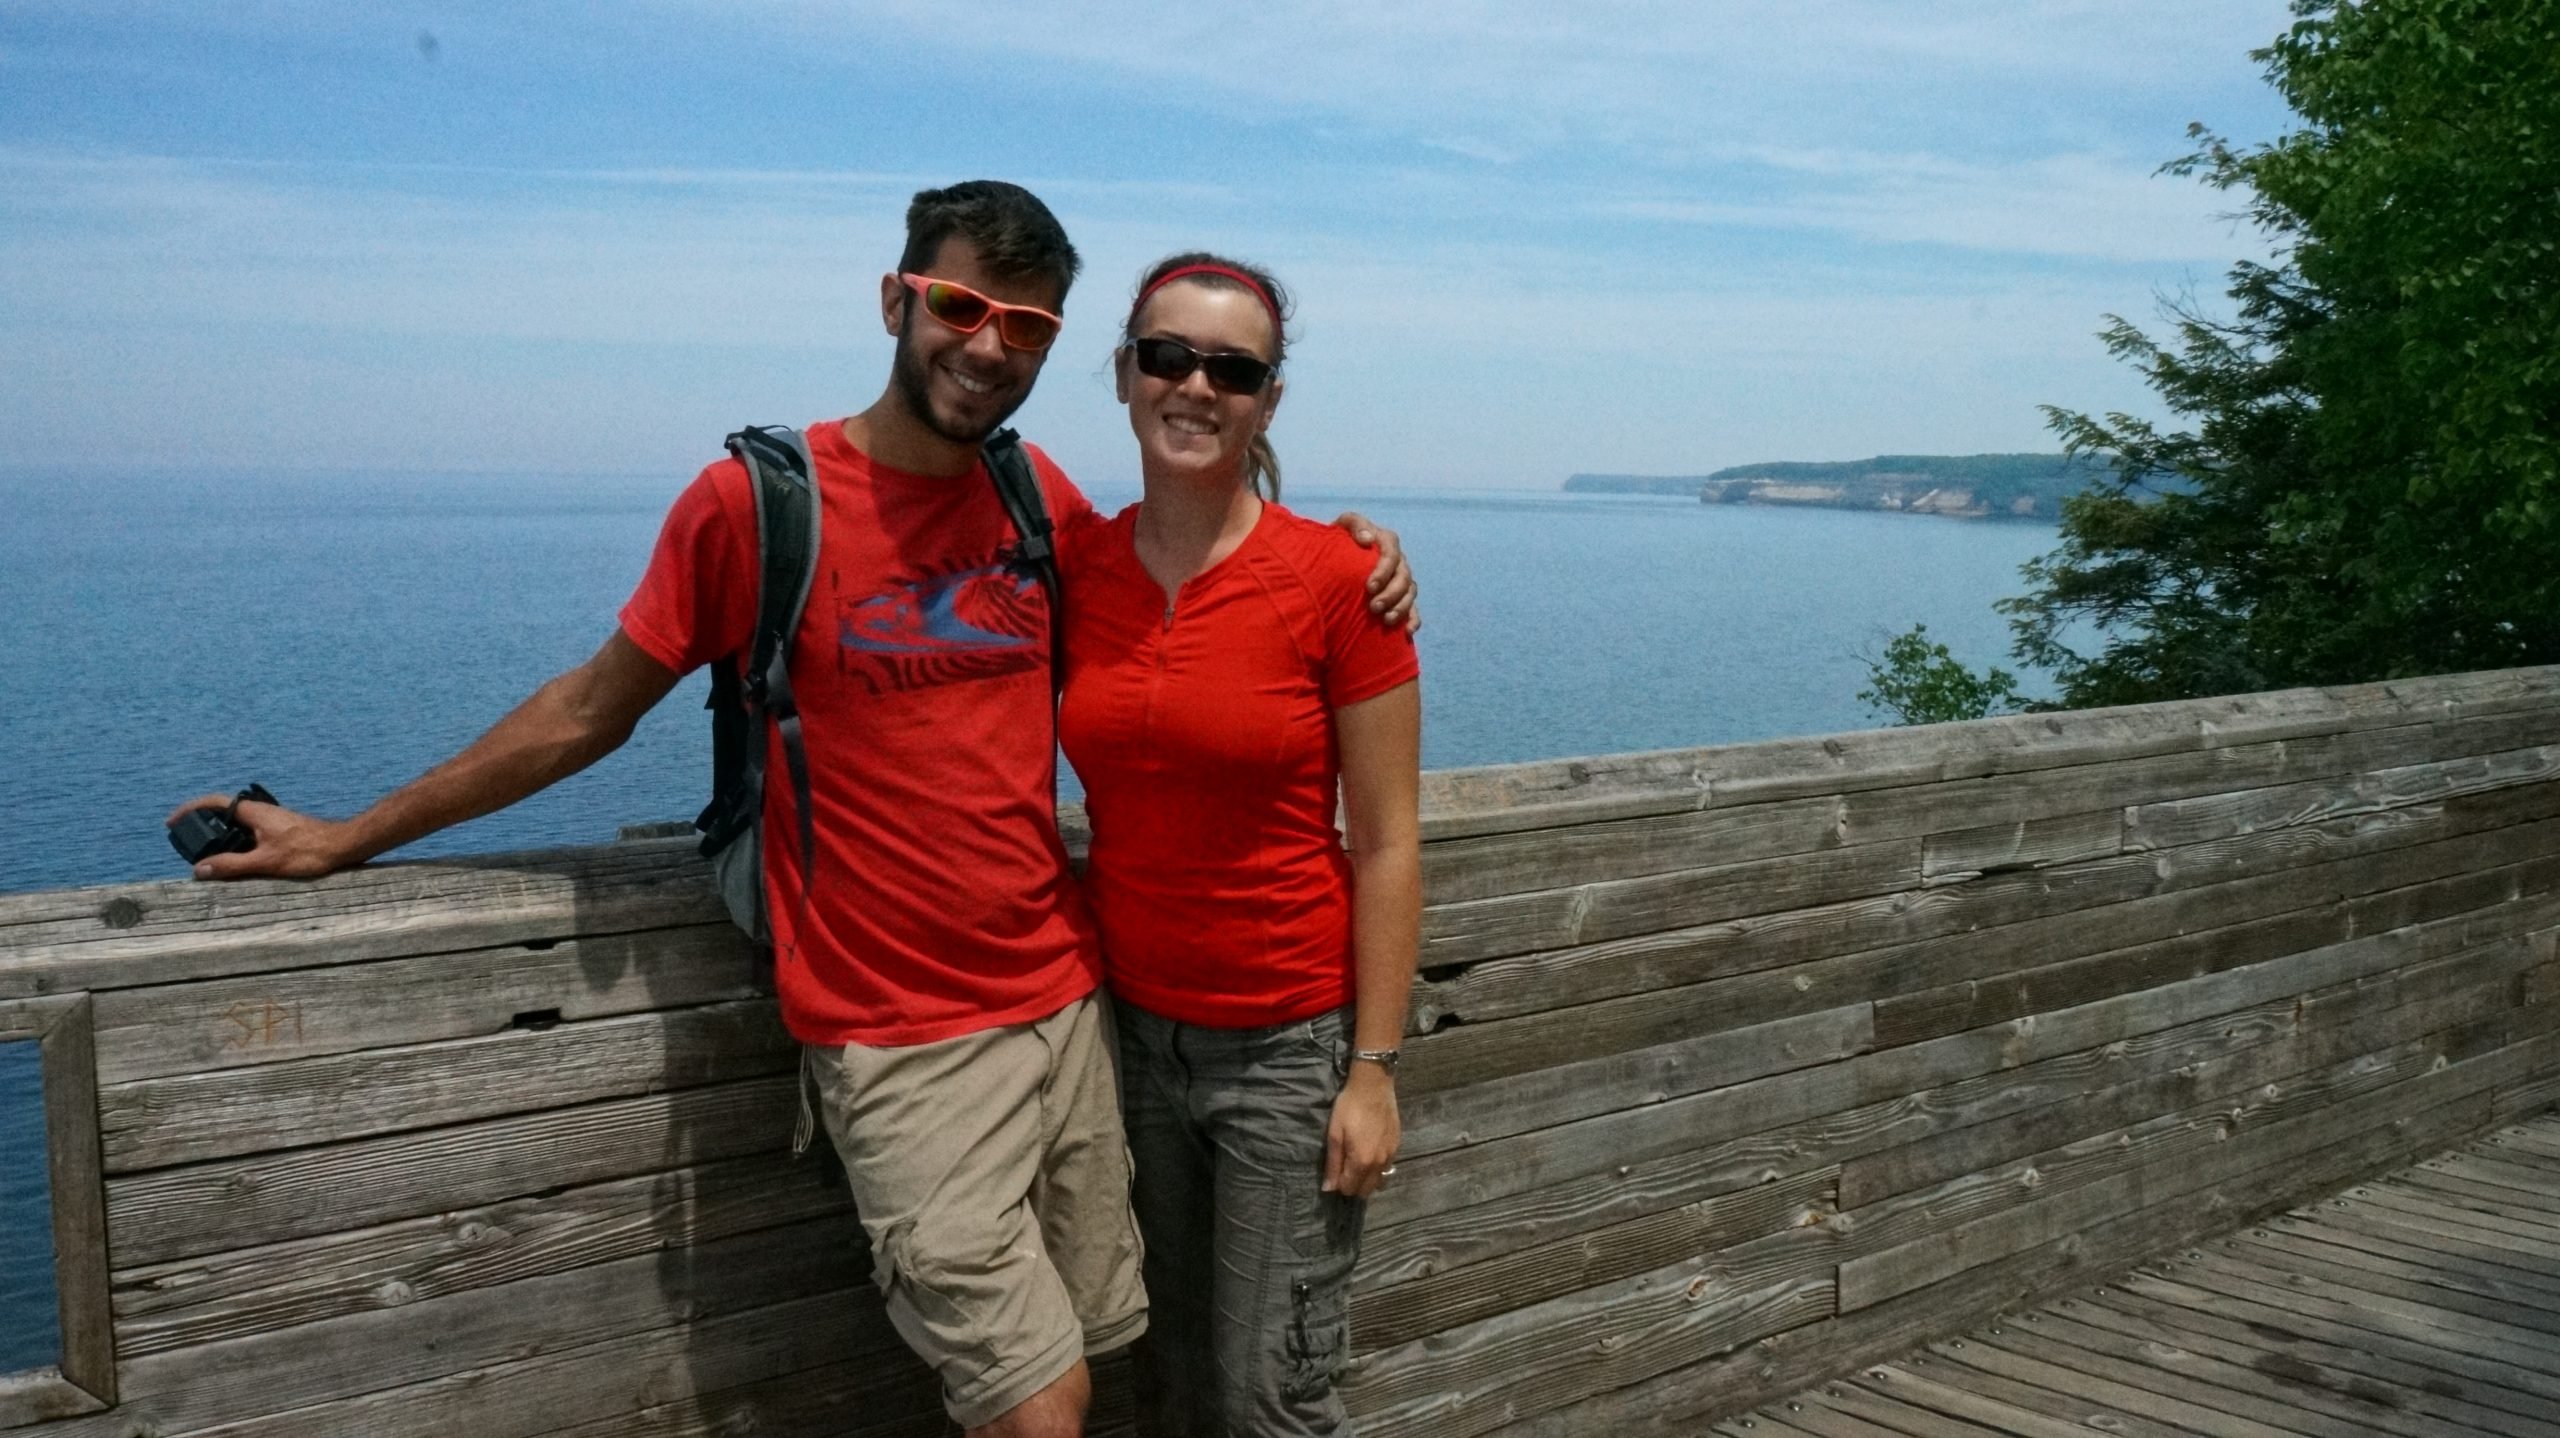 Mortons Hiking Pictured Rocks National Lakeshore in the Upper Peninsula